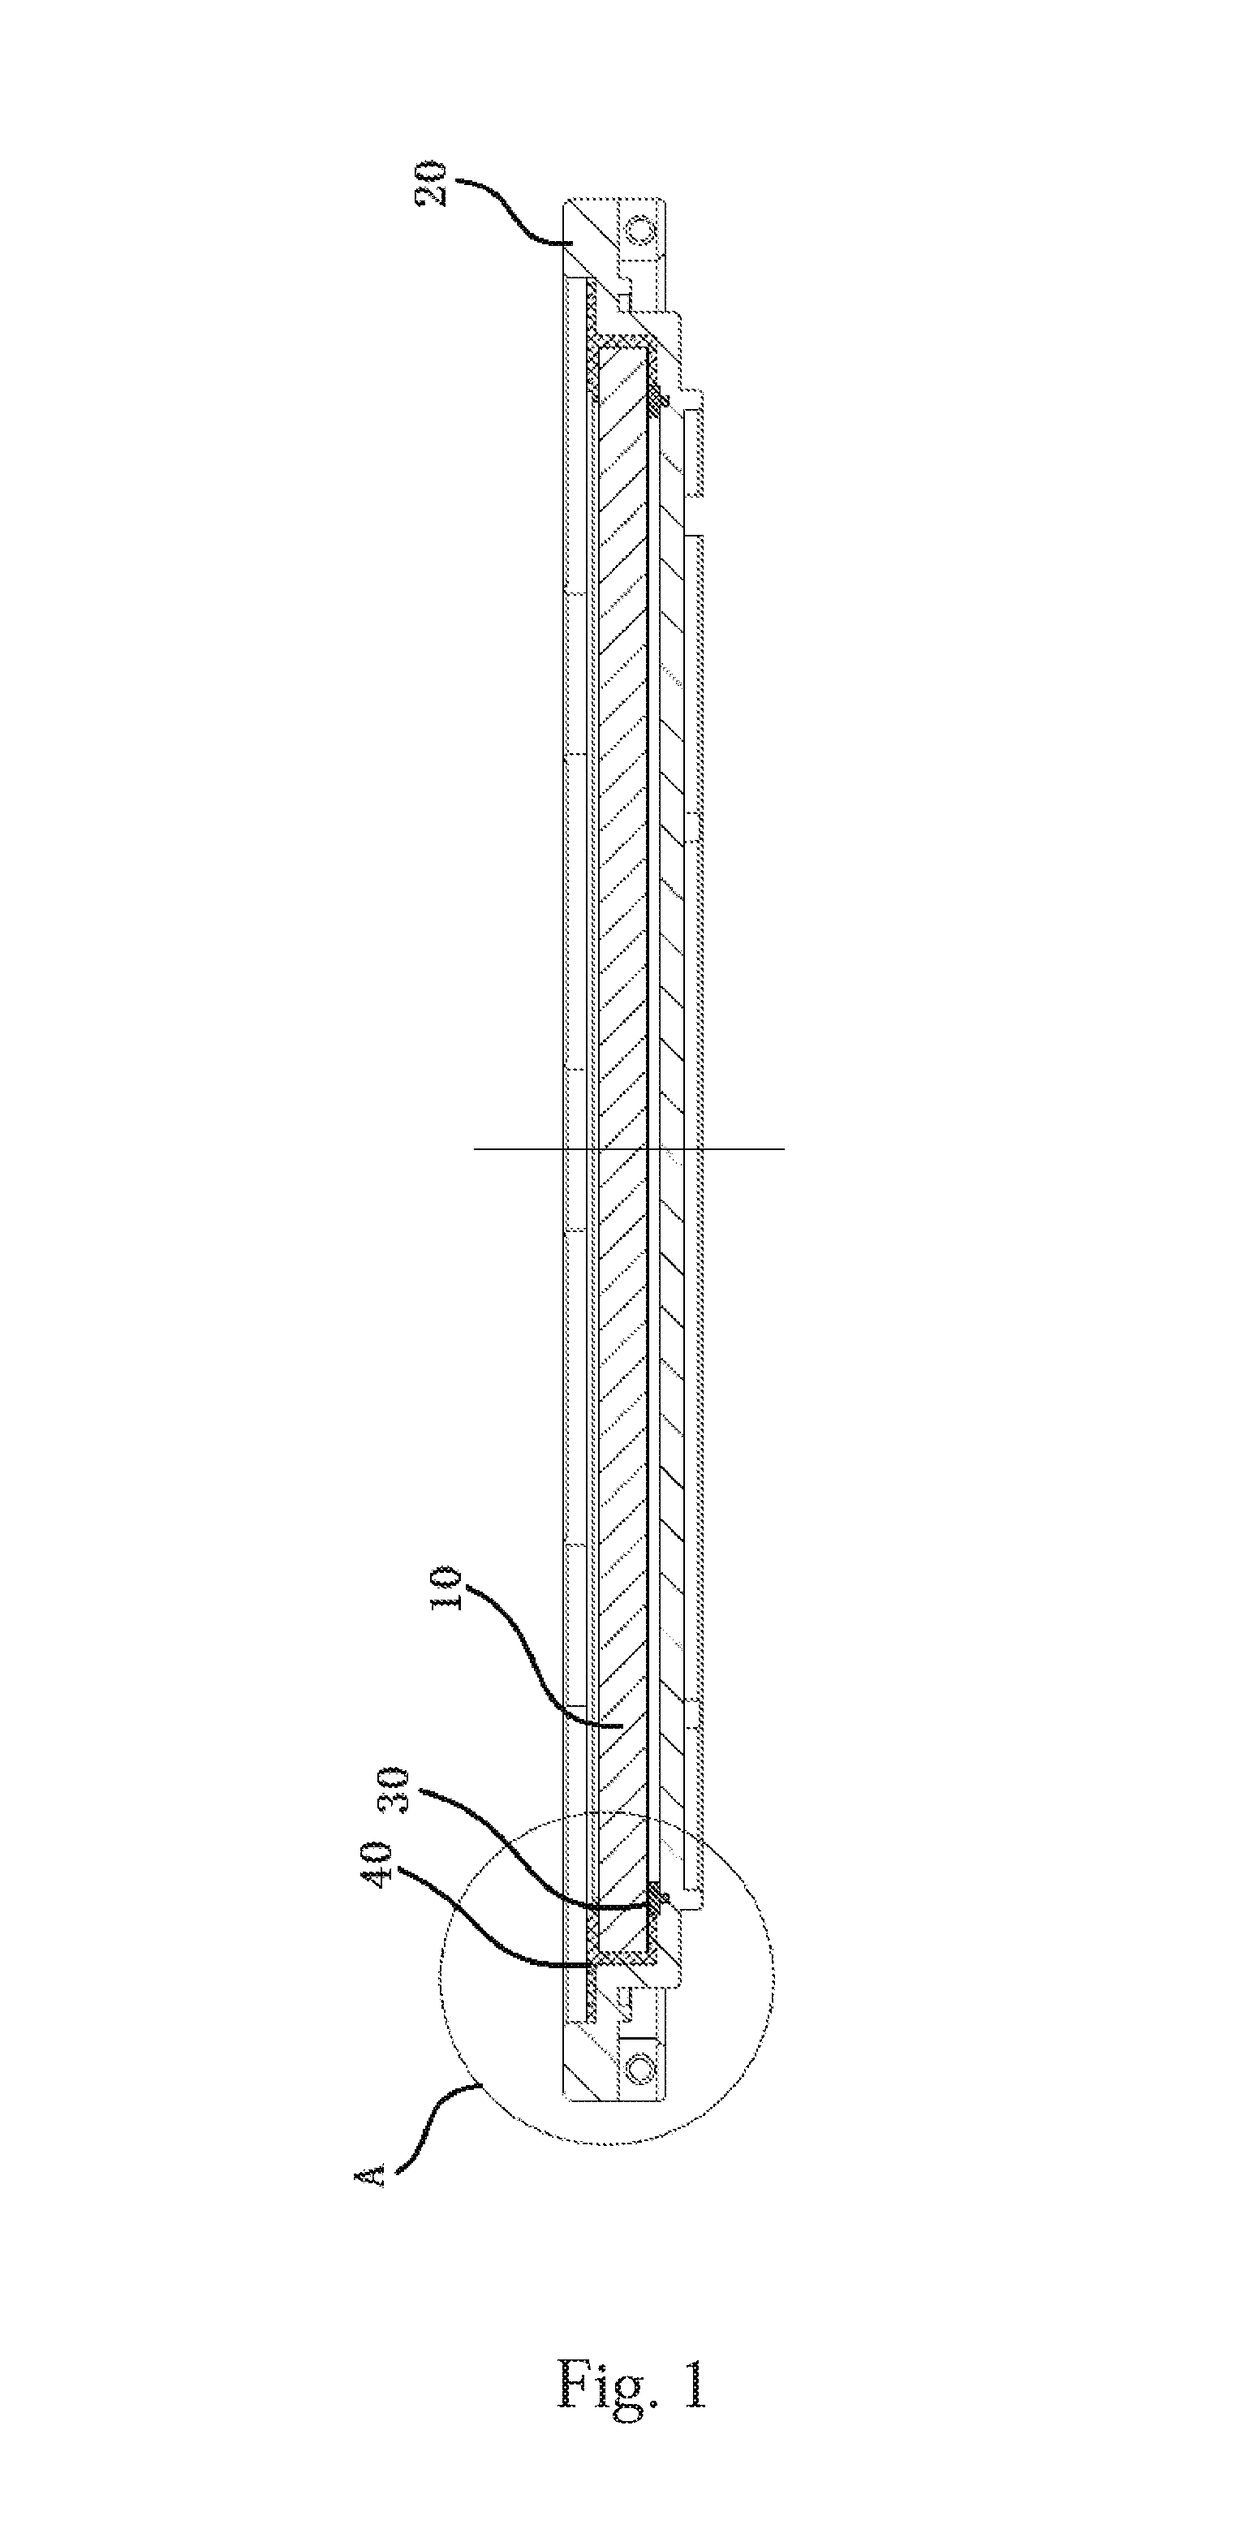 Packaging structure for waterproof LED lamp and method of making the same